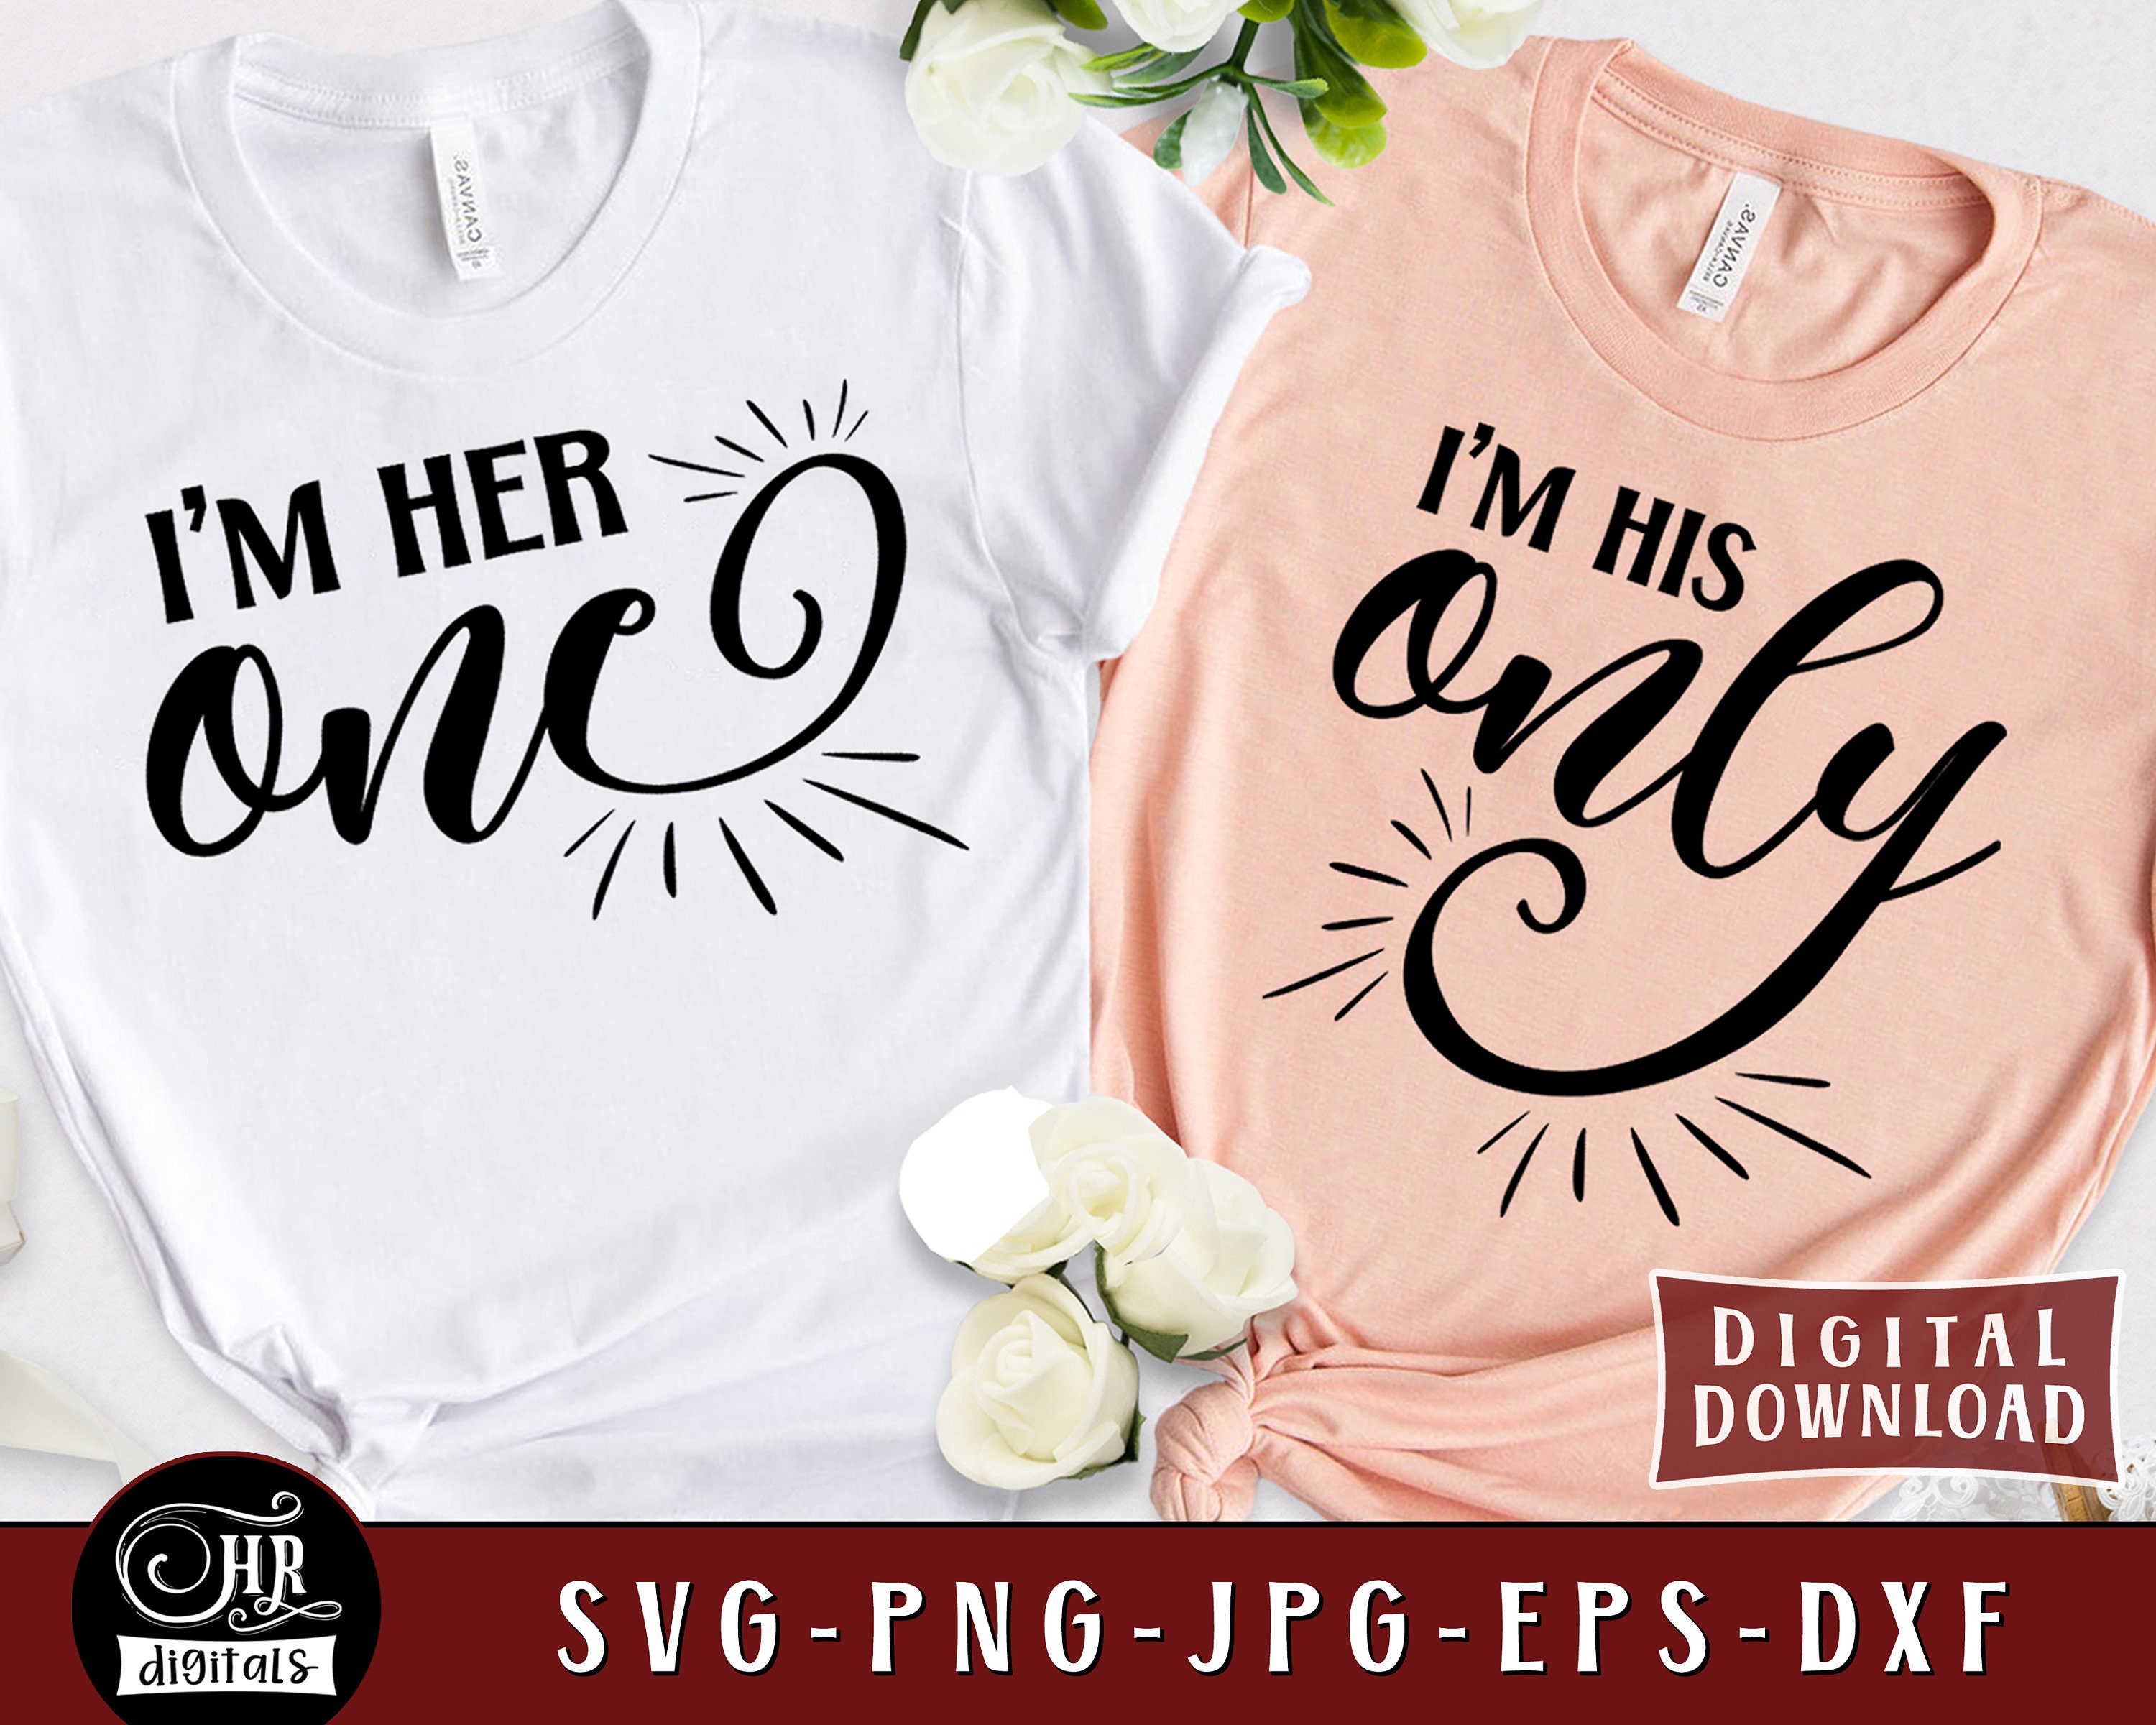 His and Hers SVG Bundle, Couples Gift Idea, Husband Wife, Boyfriend  Girlfriend, Matching Couple, Love, Romantic, Eps Png Dxf, Cricut, Crafts 